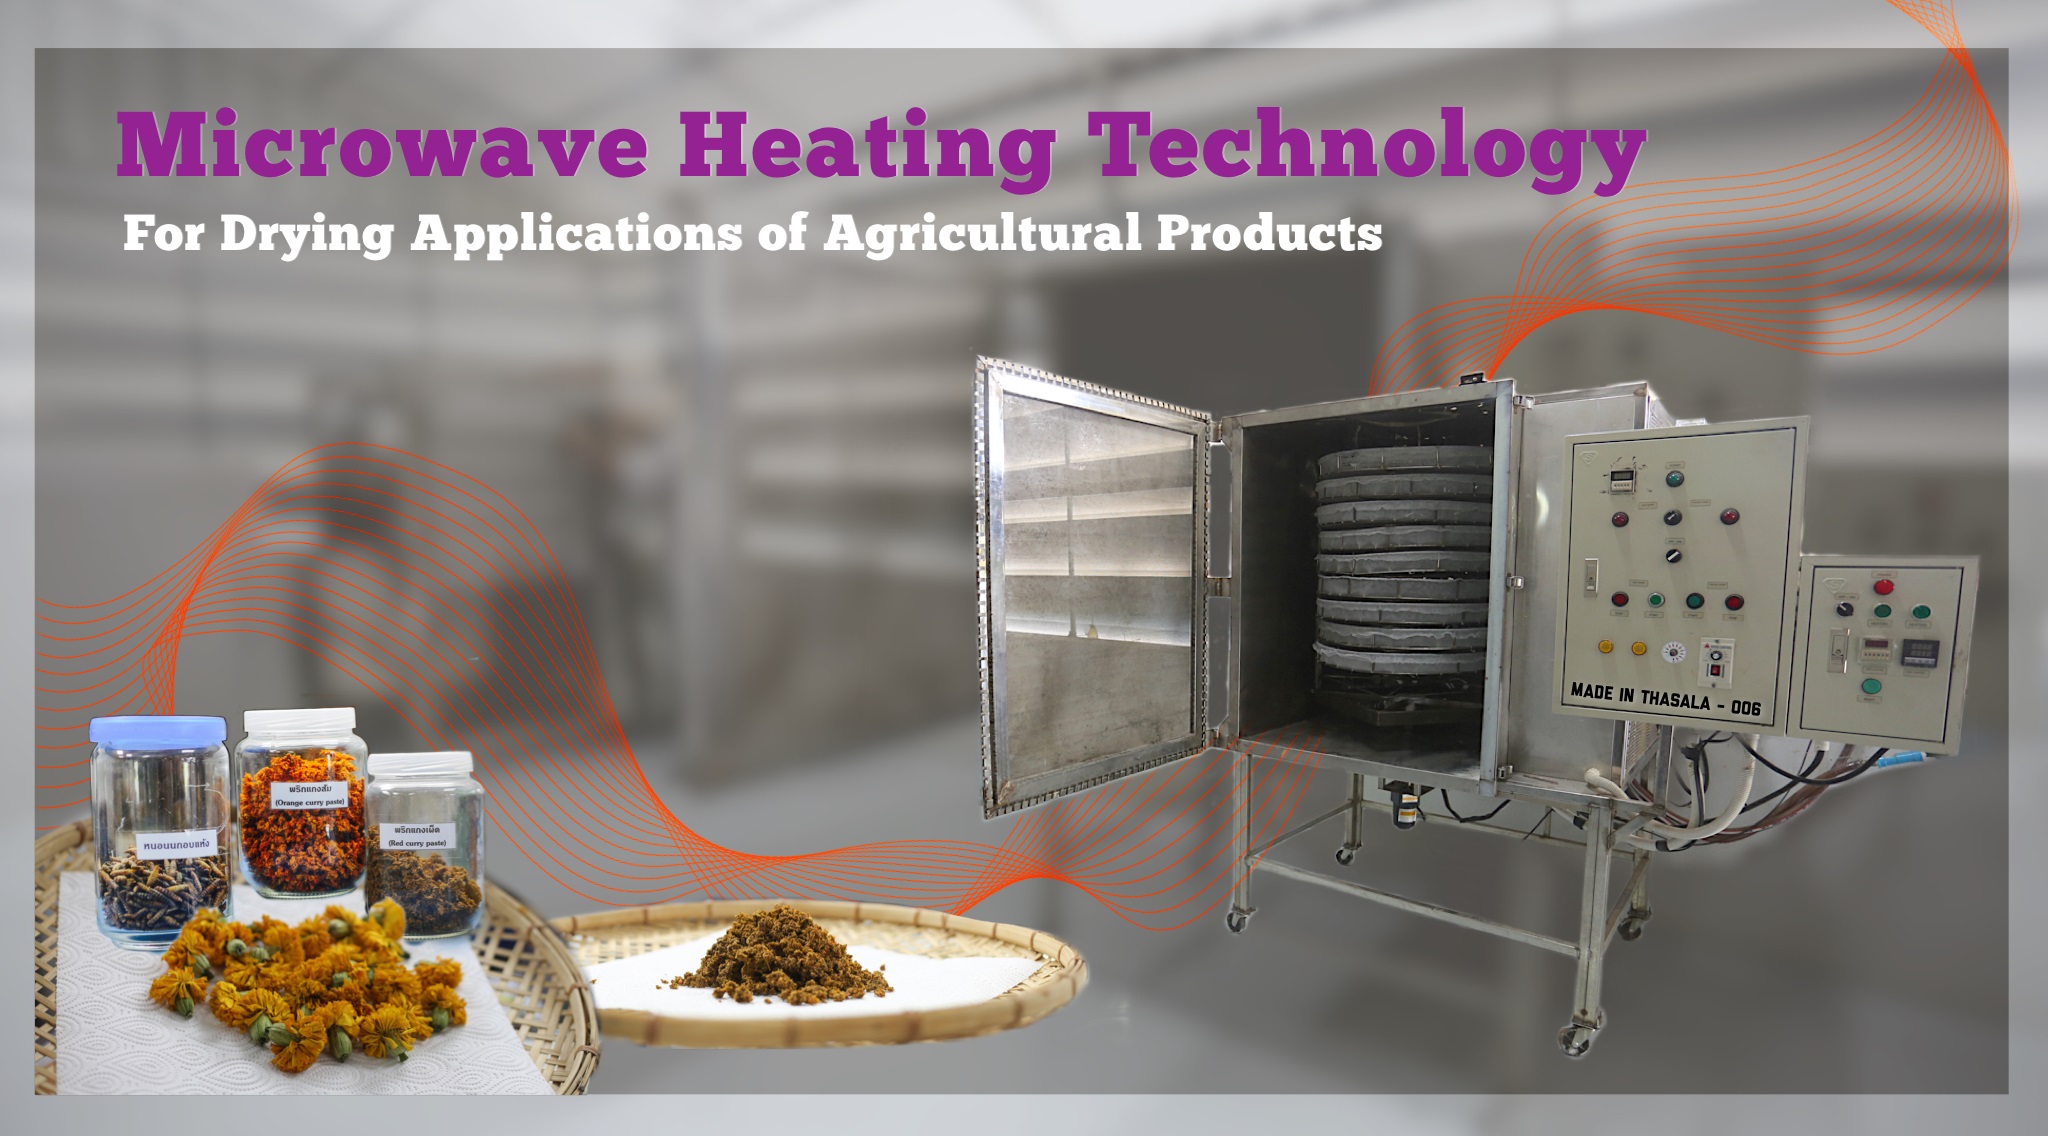 Microwave Heating Technology – A microwave system for drying applications of agricultural products